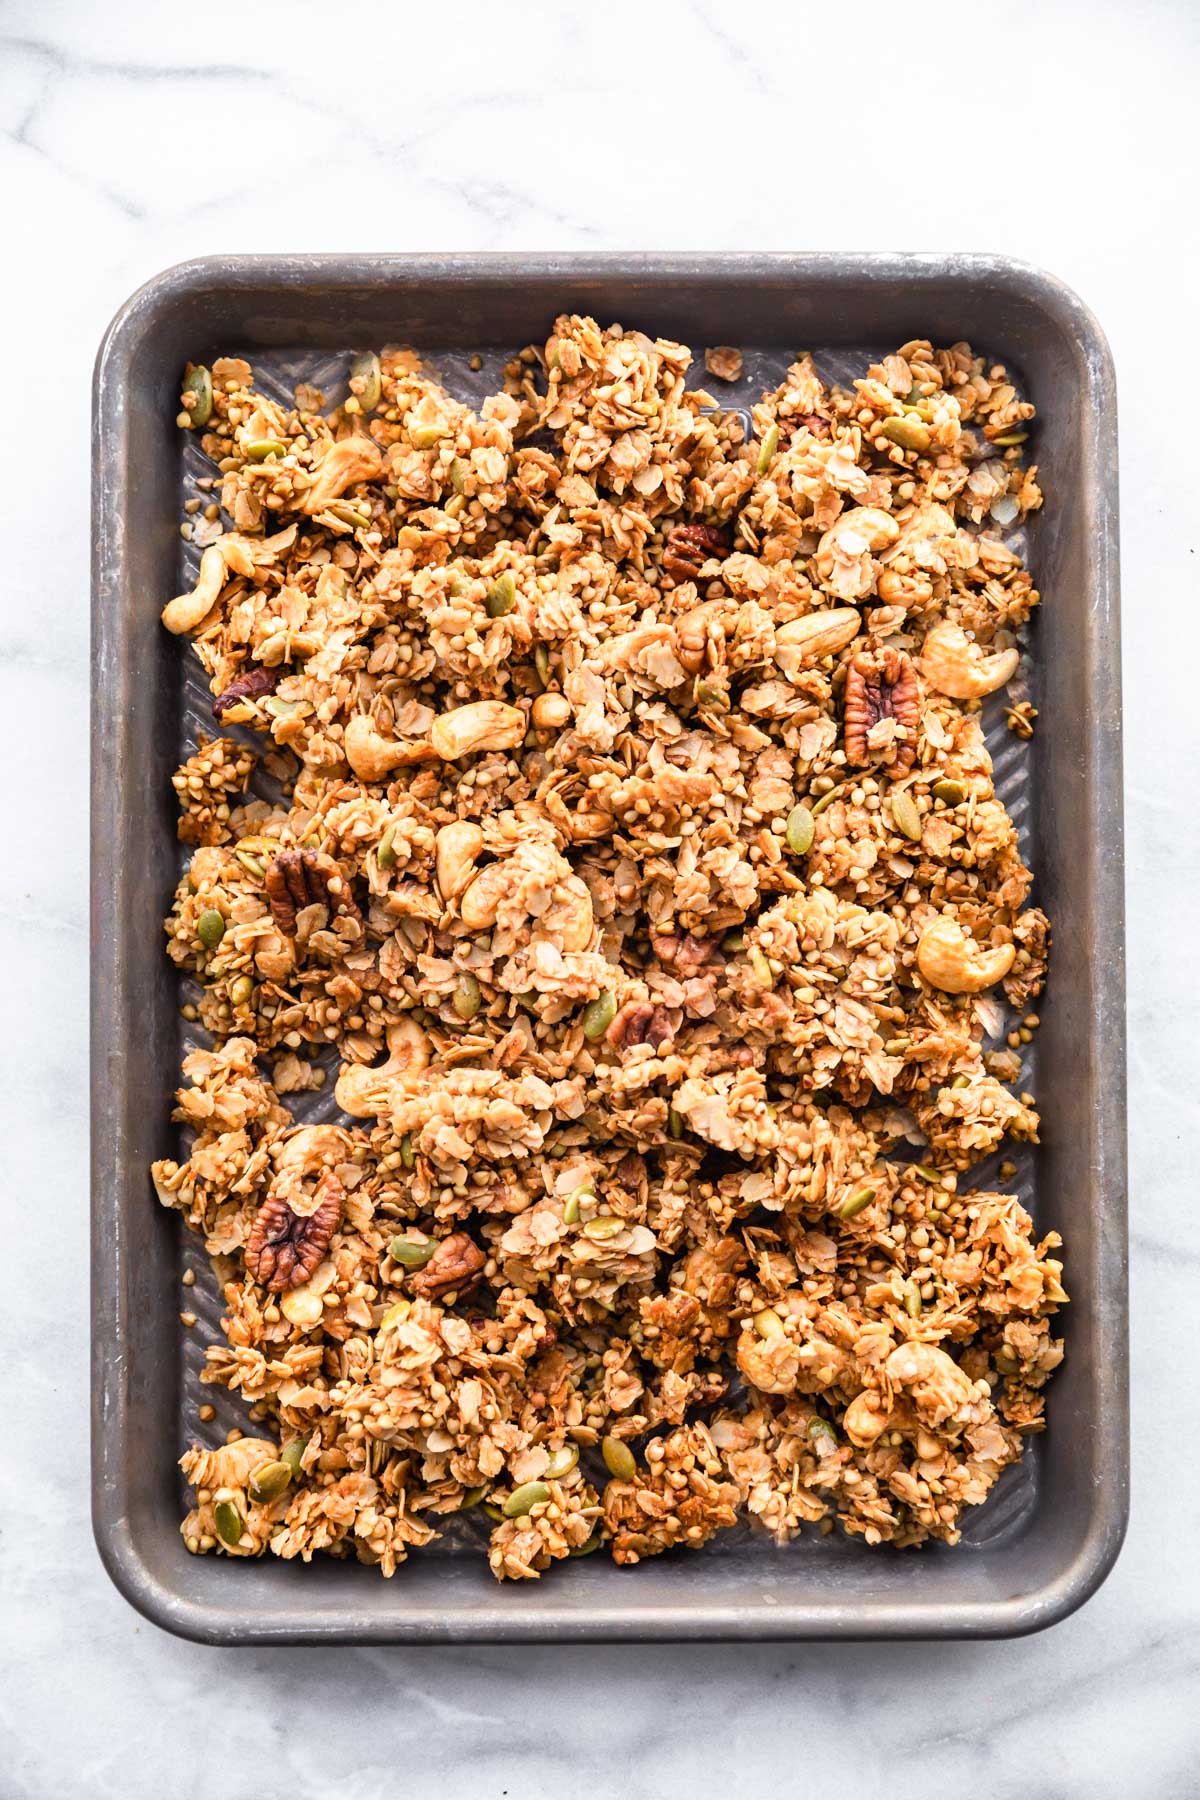 Maple buckwheat granola spread evenly on baking sheet ready to be baked